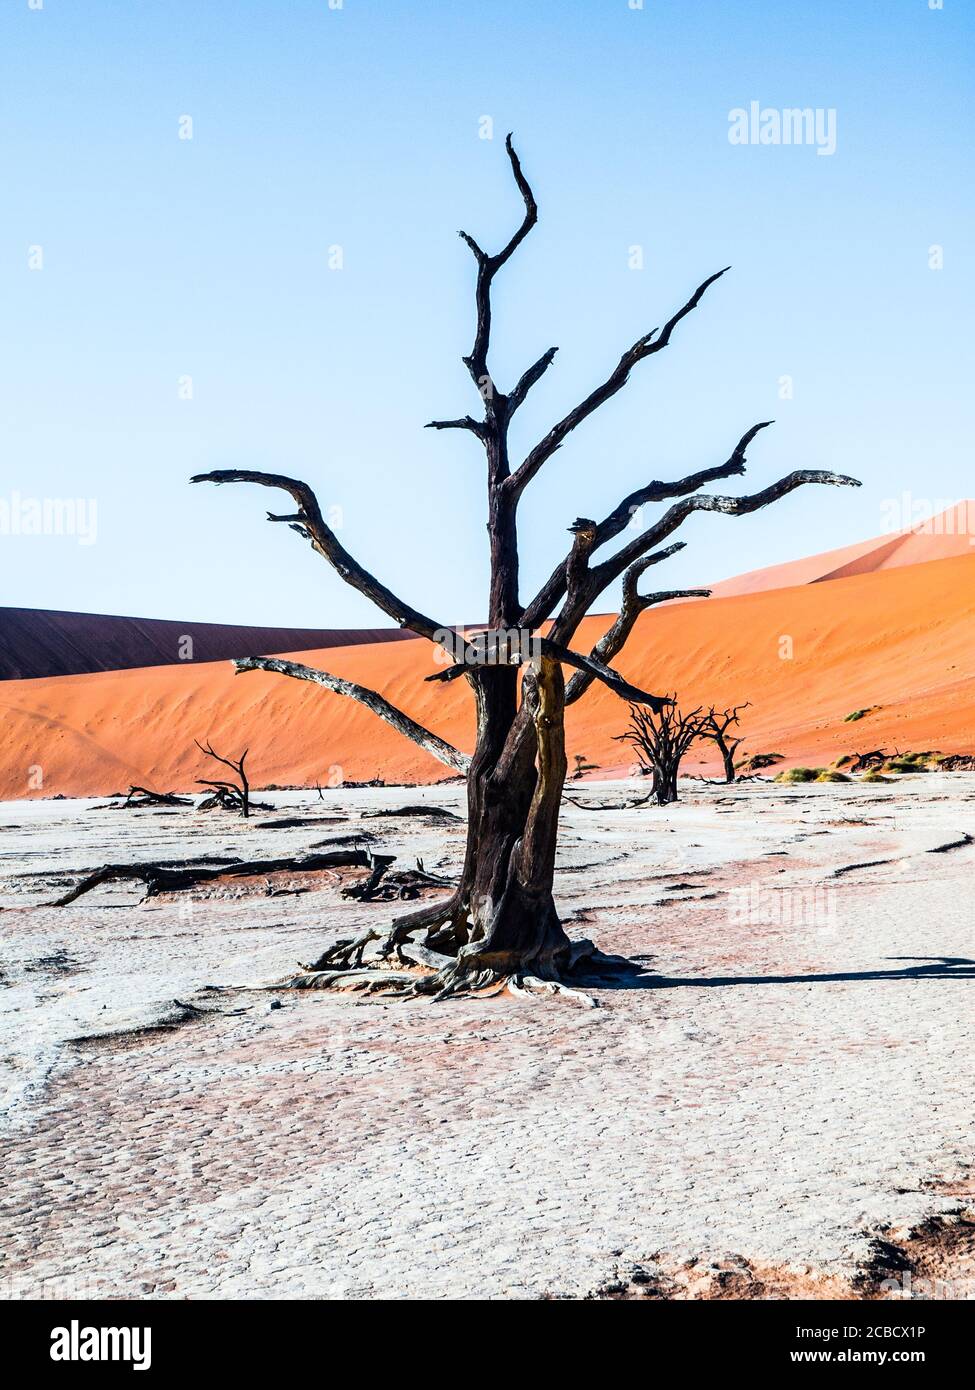 Dead camel thorn trees in Deadvlei dry pan with cracked soil in the middle of Namib Desert red dunes, near Sossusvlei, Namib-Naukluft National Park, Namibia, Africa Stock Photo